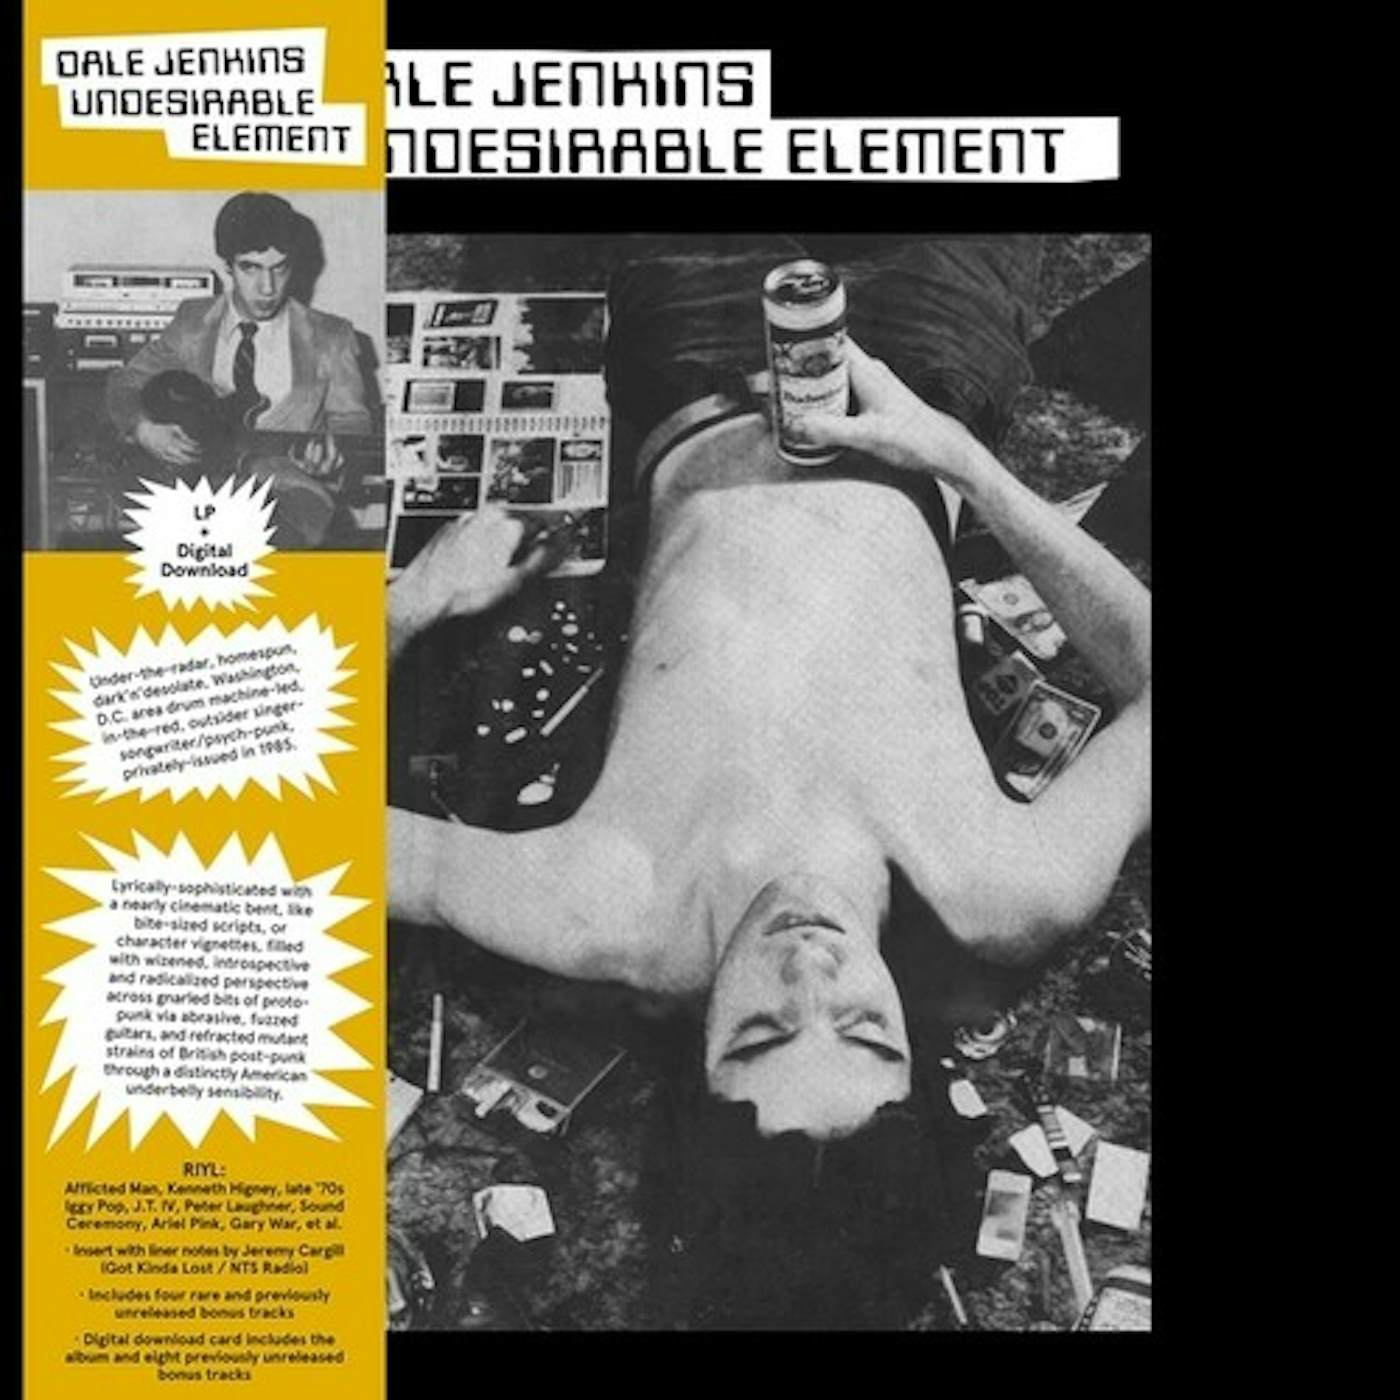 Dale Jenkins UNDESIRABLE ELEMENT CD